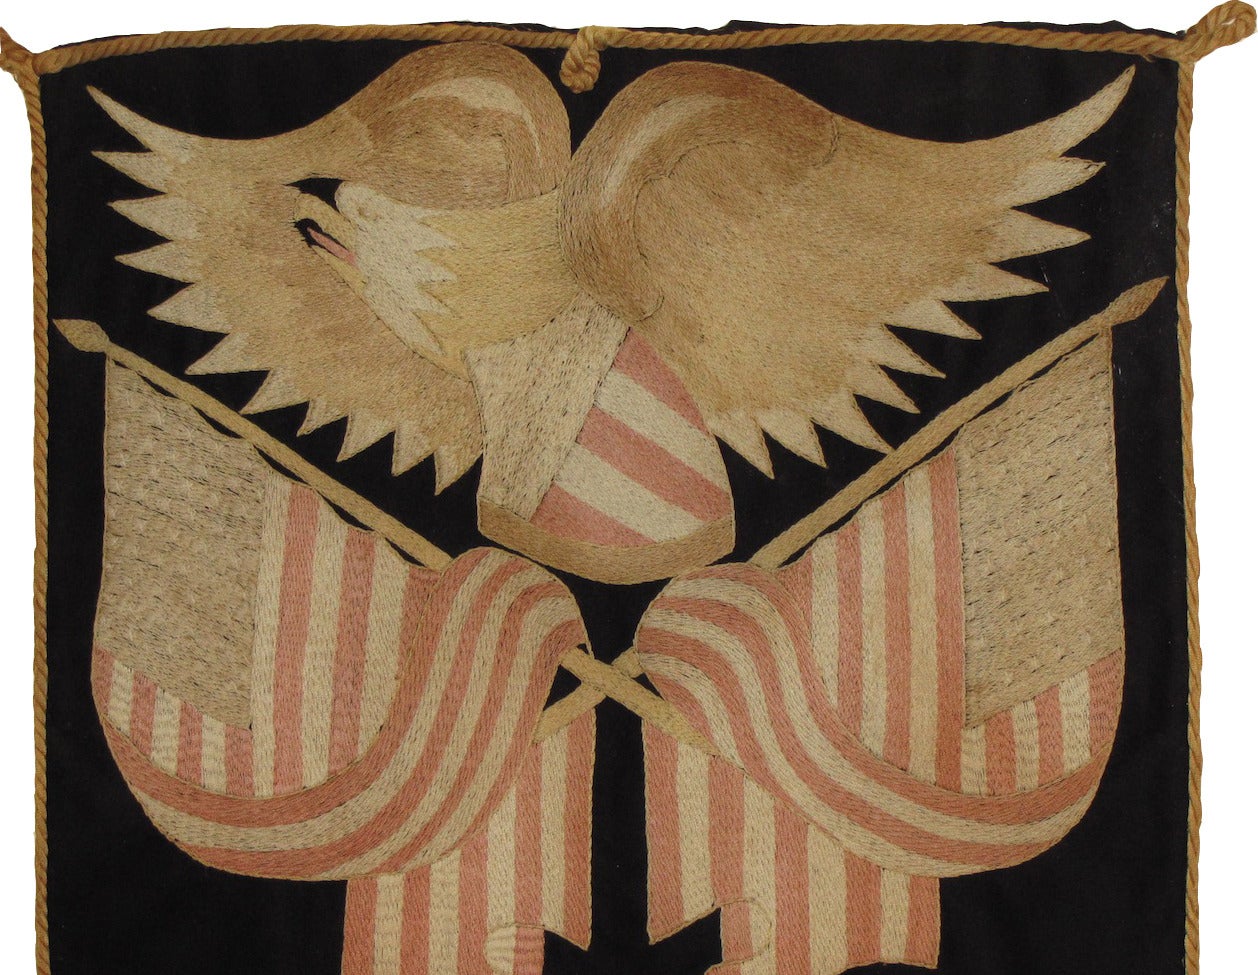 Rare large silk Maritime Eagle. 

Very rare antique patriotic textile of a large eagle.
Embroidered by hand in silk. Exquisite craftsmanship and Fine detail throughout. The eagle has mellowed to a beautiful golden hue over the years.

Antique